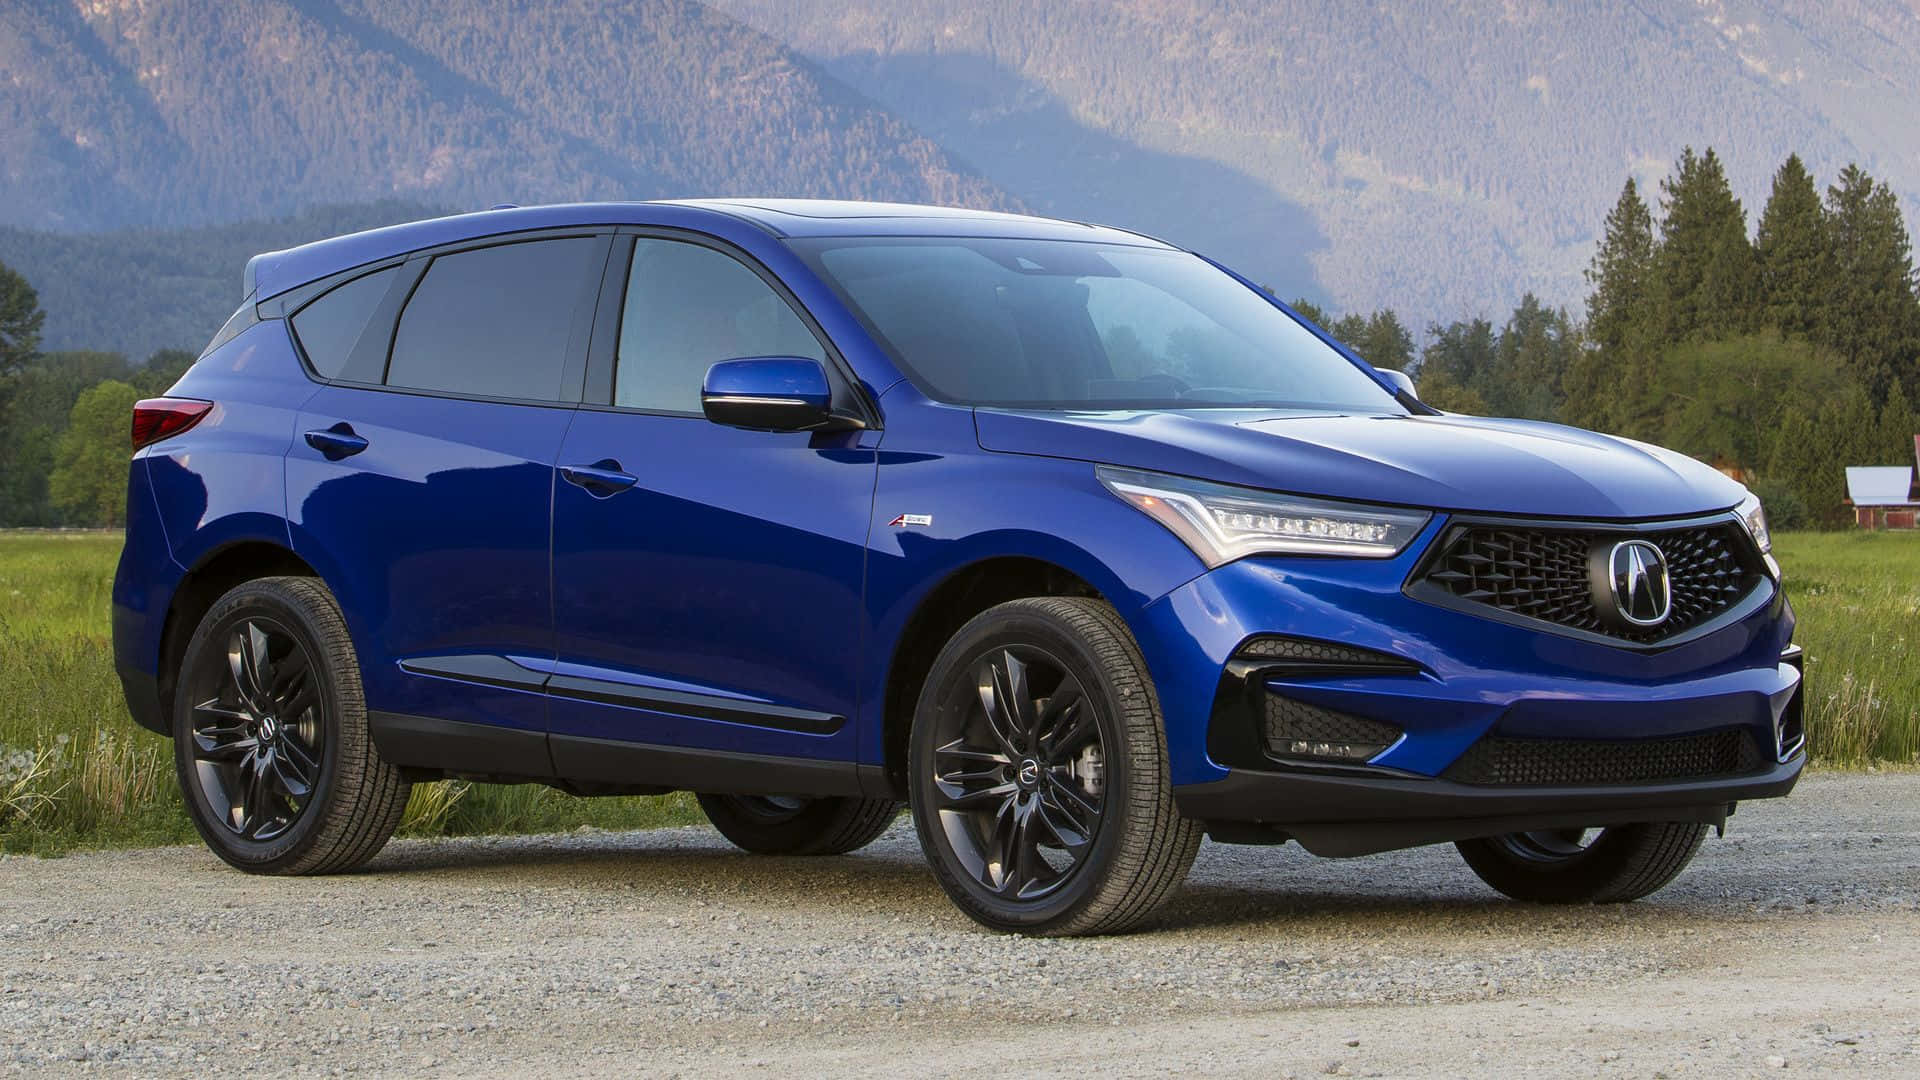 "acura Rdx: A Blend Of Power, Sophistication, And Performance" Wallpaper